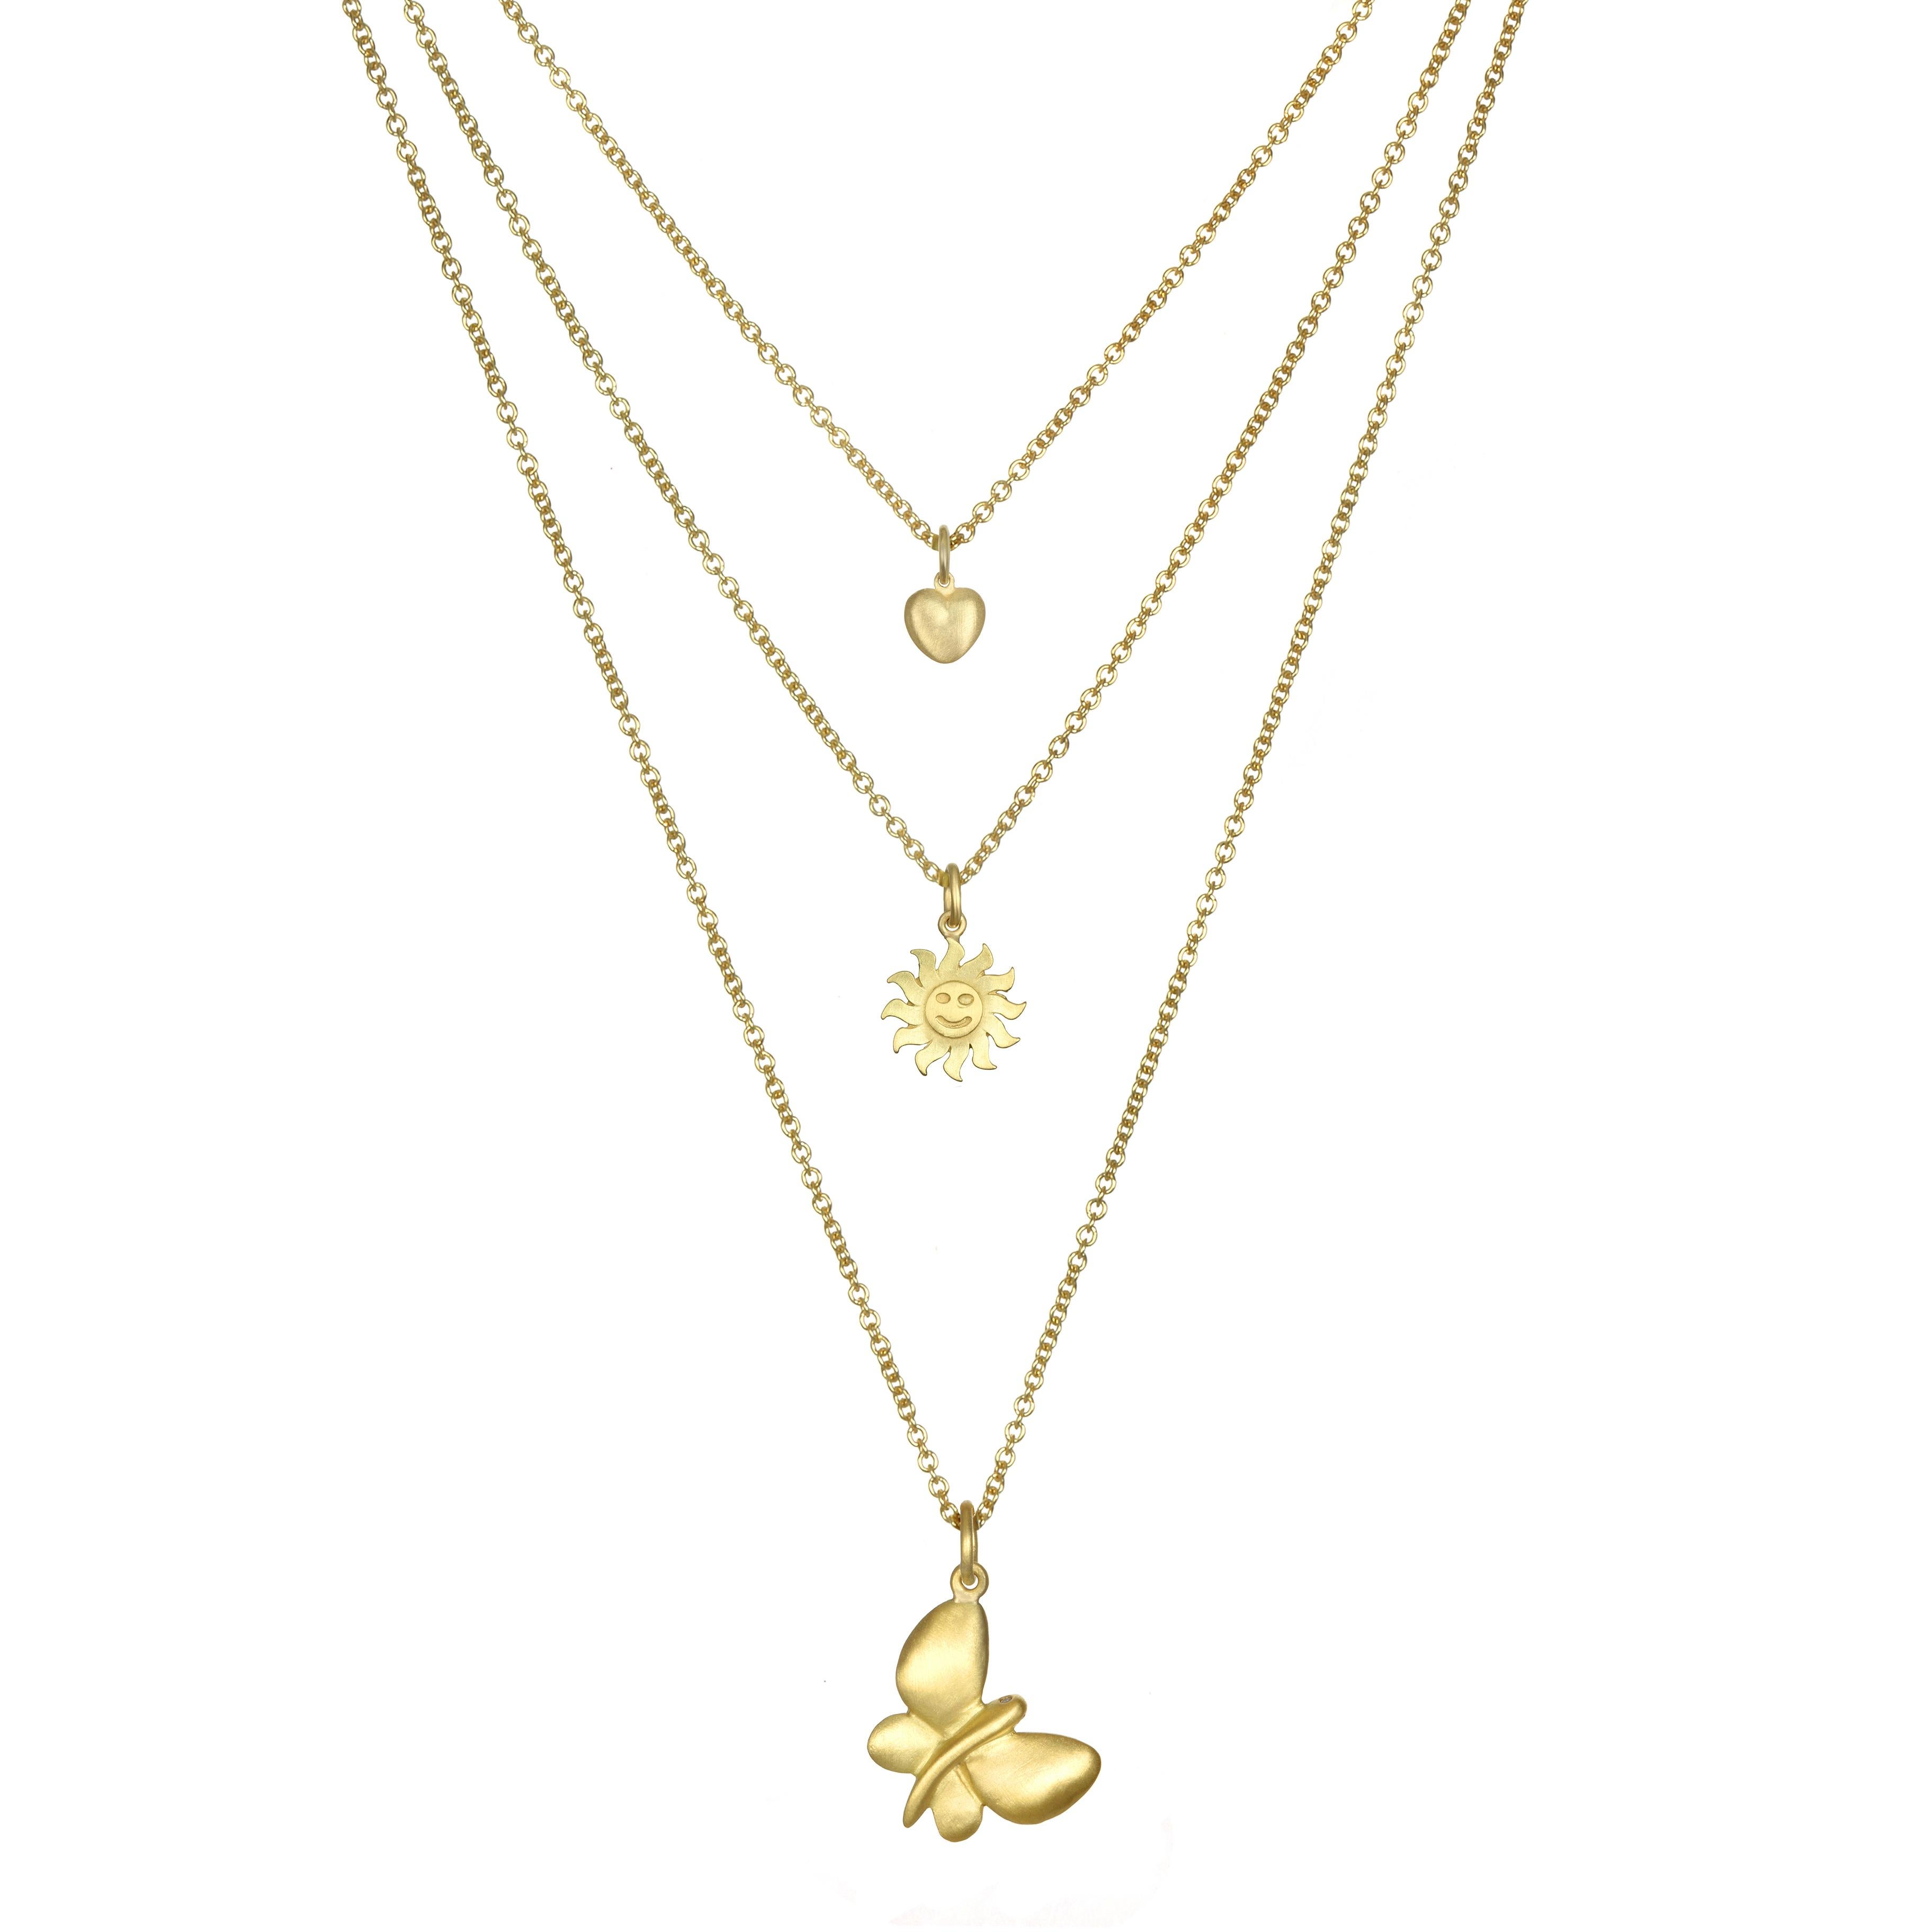 Representing beauty, endurance, change and hope - this butterfly charm is crafted in 18K  gold with white diamond eyes. The cable chain is 16-18